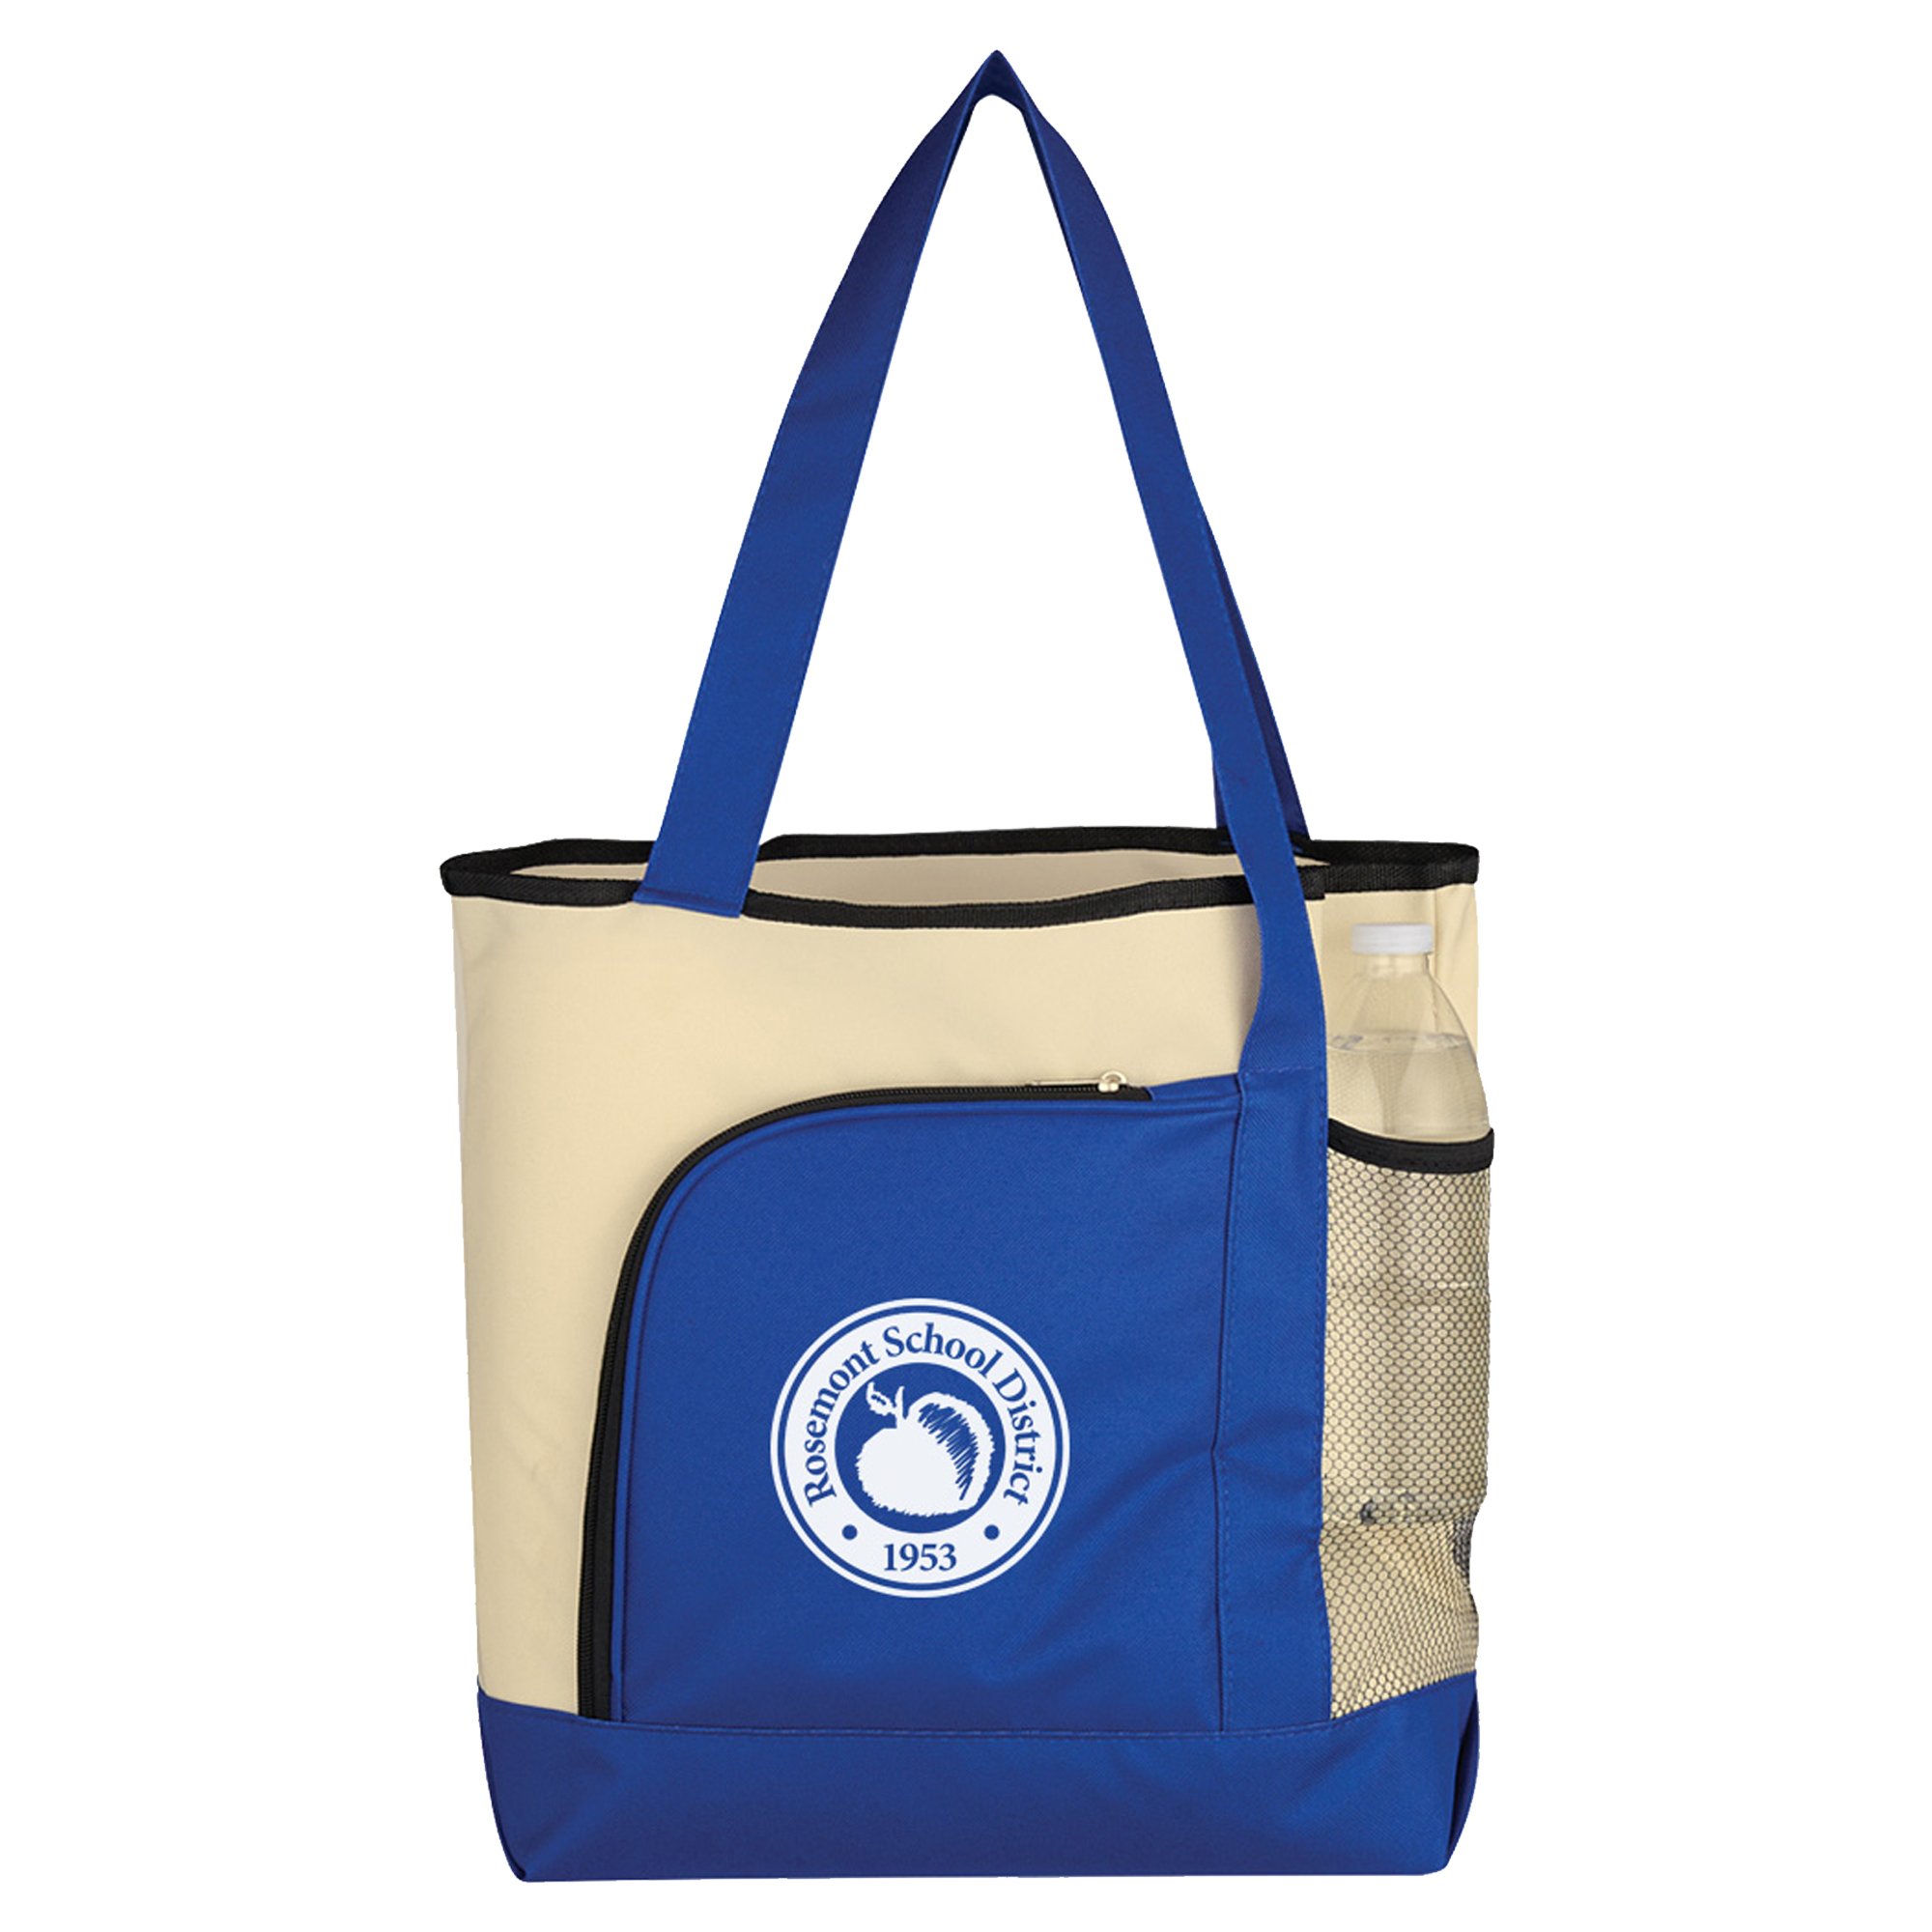 Buy promotional Around the Bend Tote Bag at National Pen - pens.com